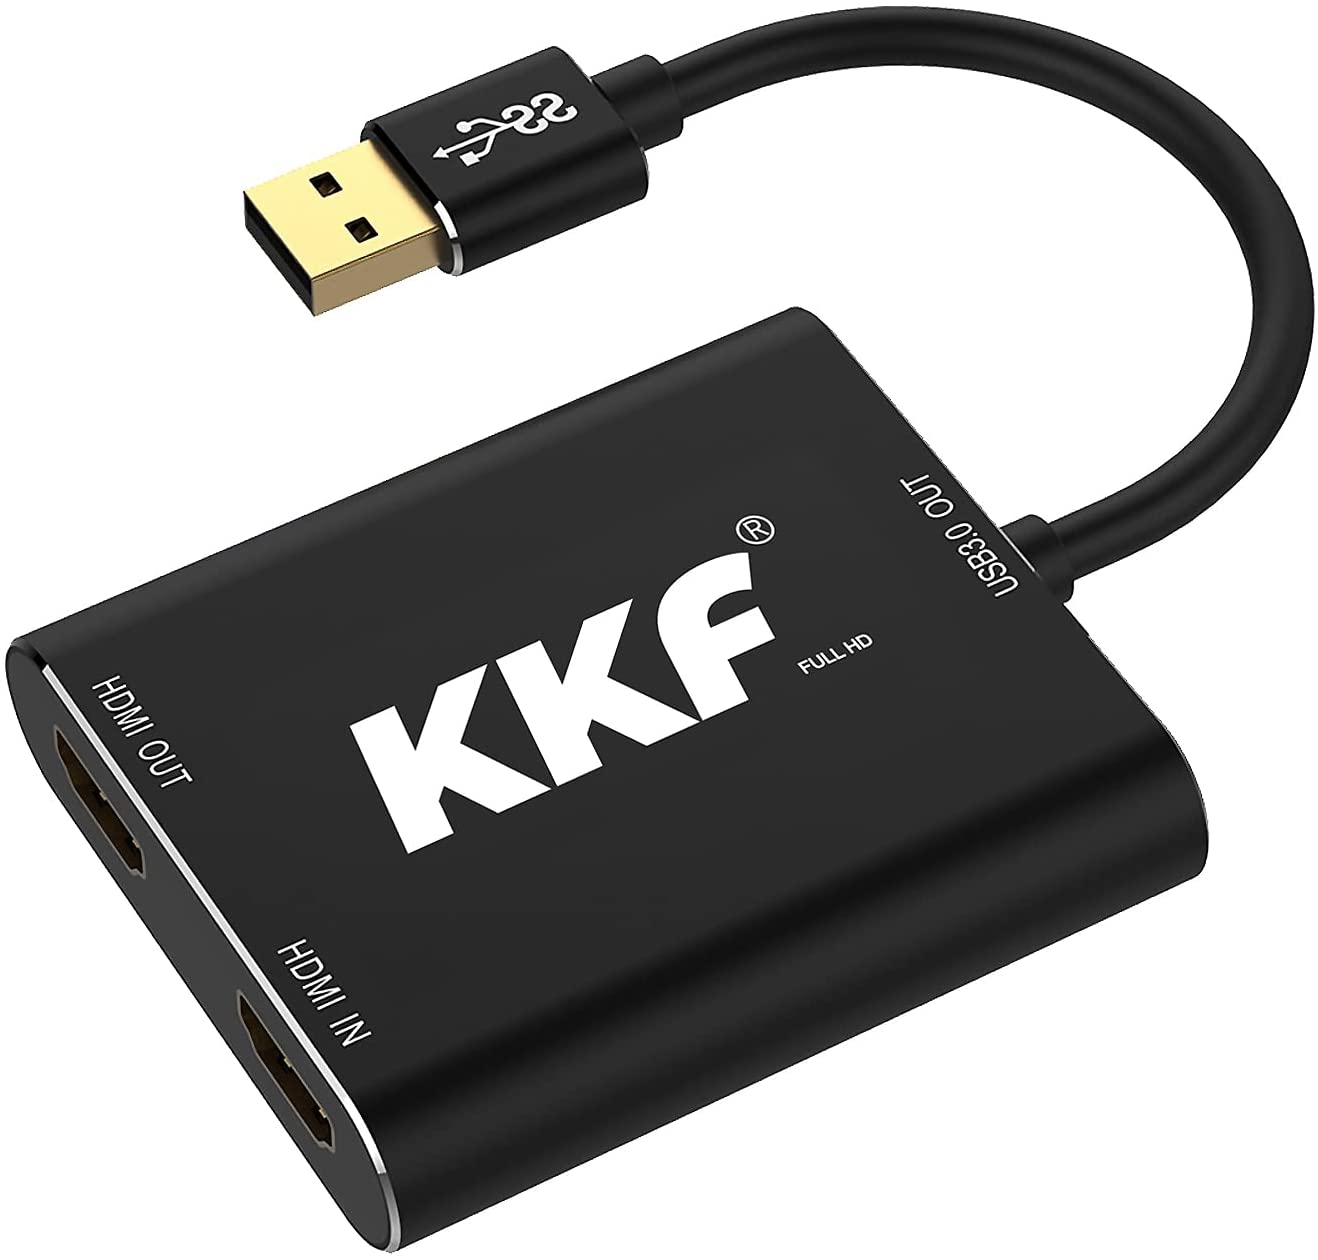 KKF HDMI Video Capture Card 4K, USB3.0 1080P 60FPS HD Ultra-Low Latency, Game Capture Device Work with PS5 PS4 Xbox Nintendo Switch DSLR for Twitch YouTube Live Streaming and Recording